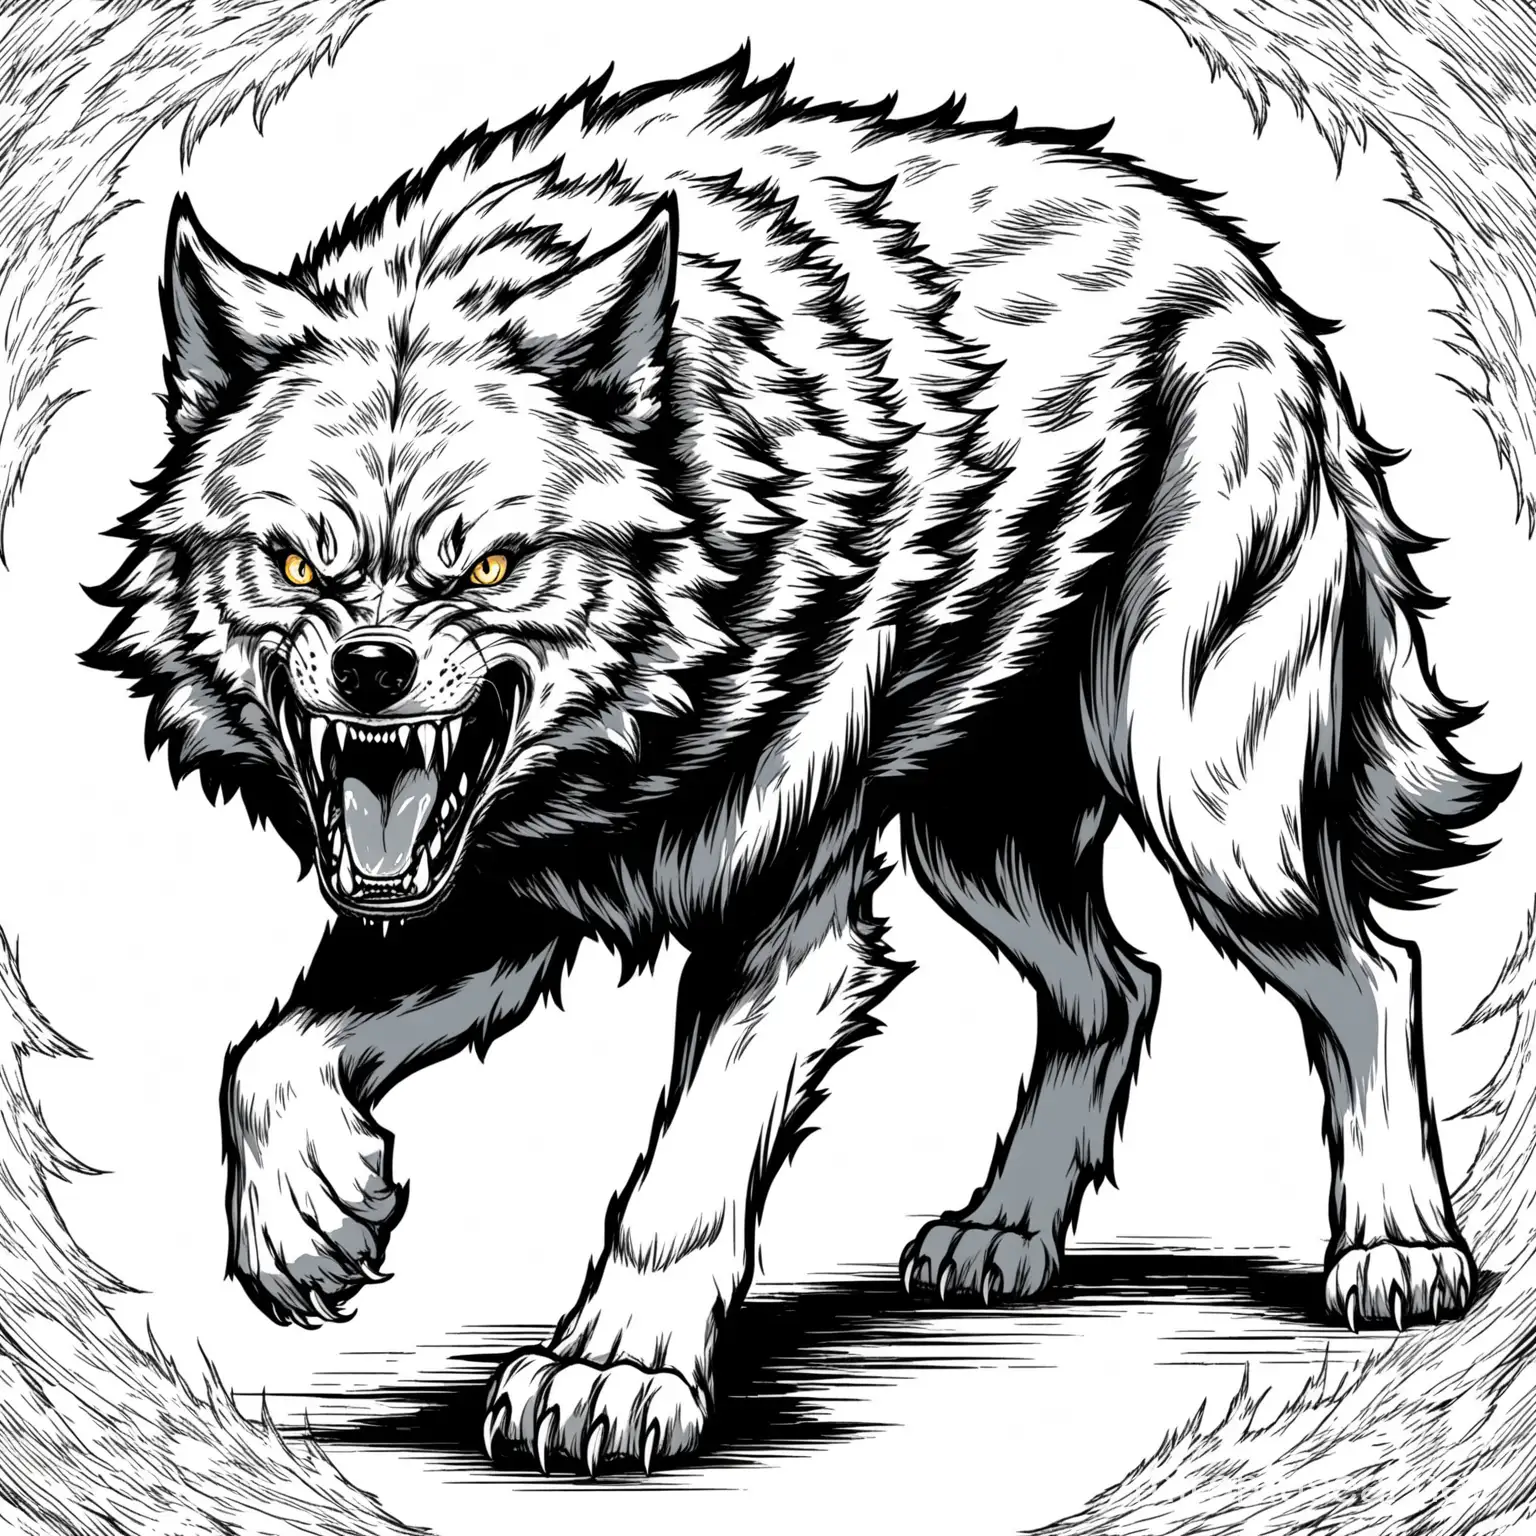 Dynamic Wolf Illustration in Colorful Coloring Book Style